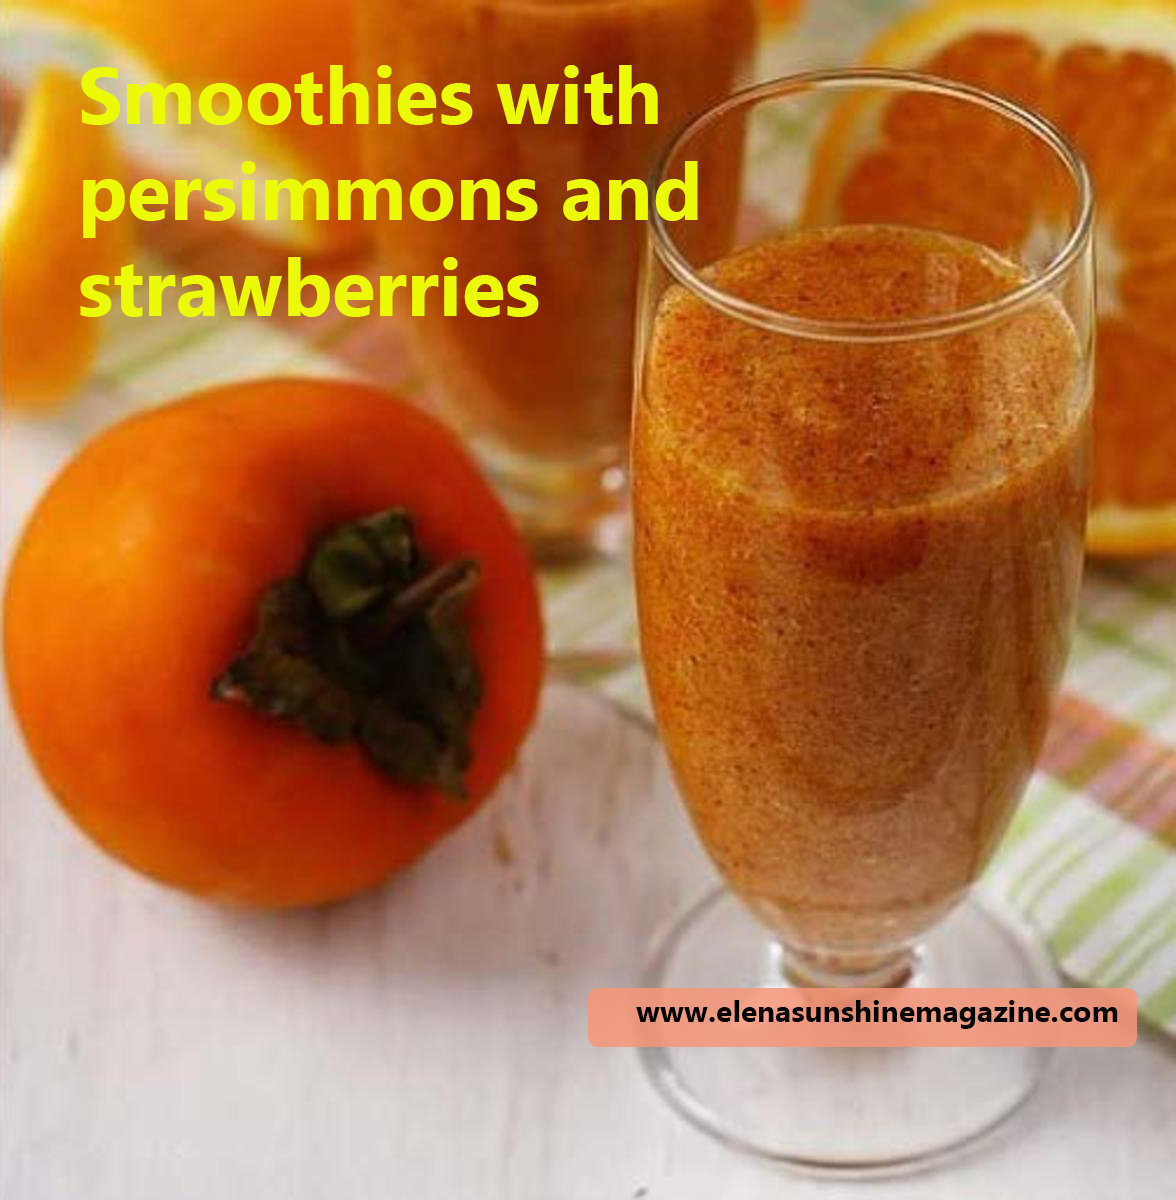 Smoothies with persimmons and strawberries